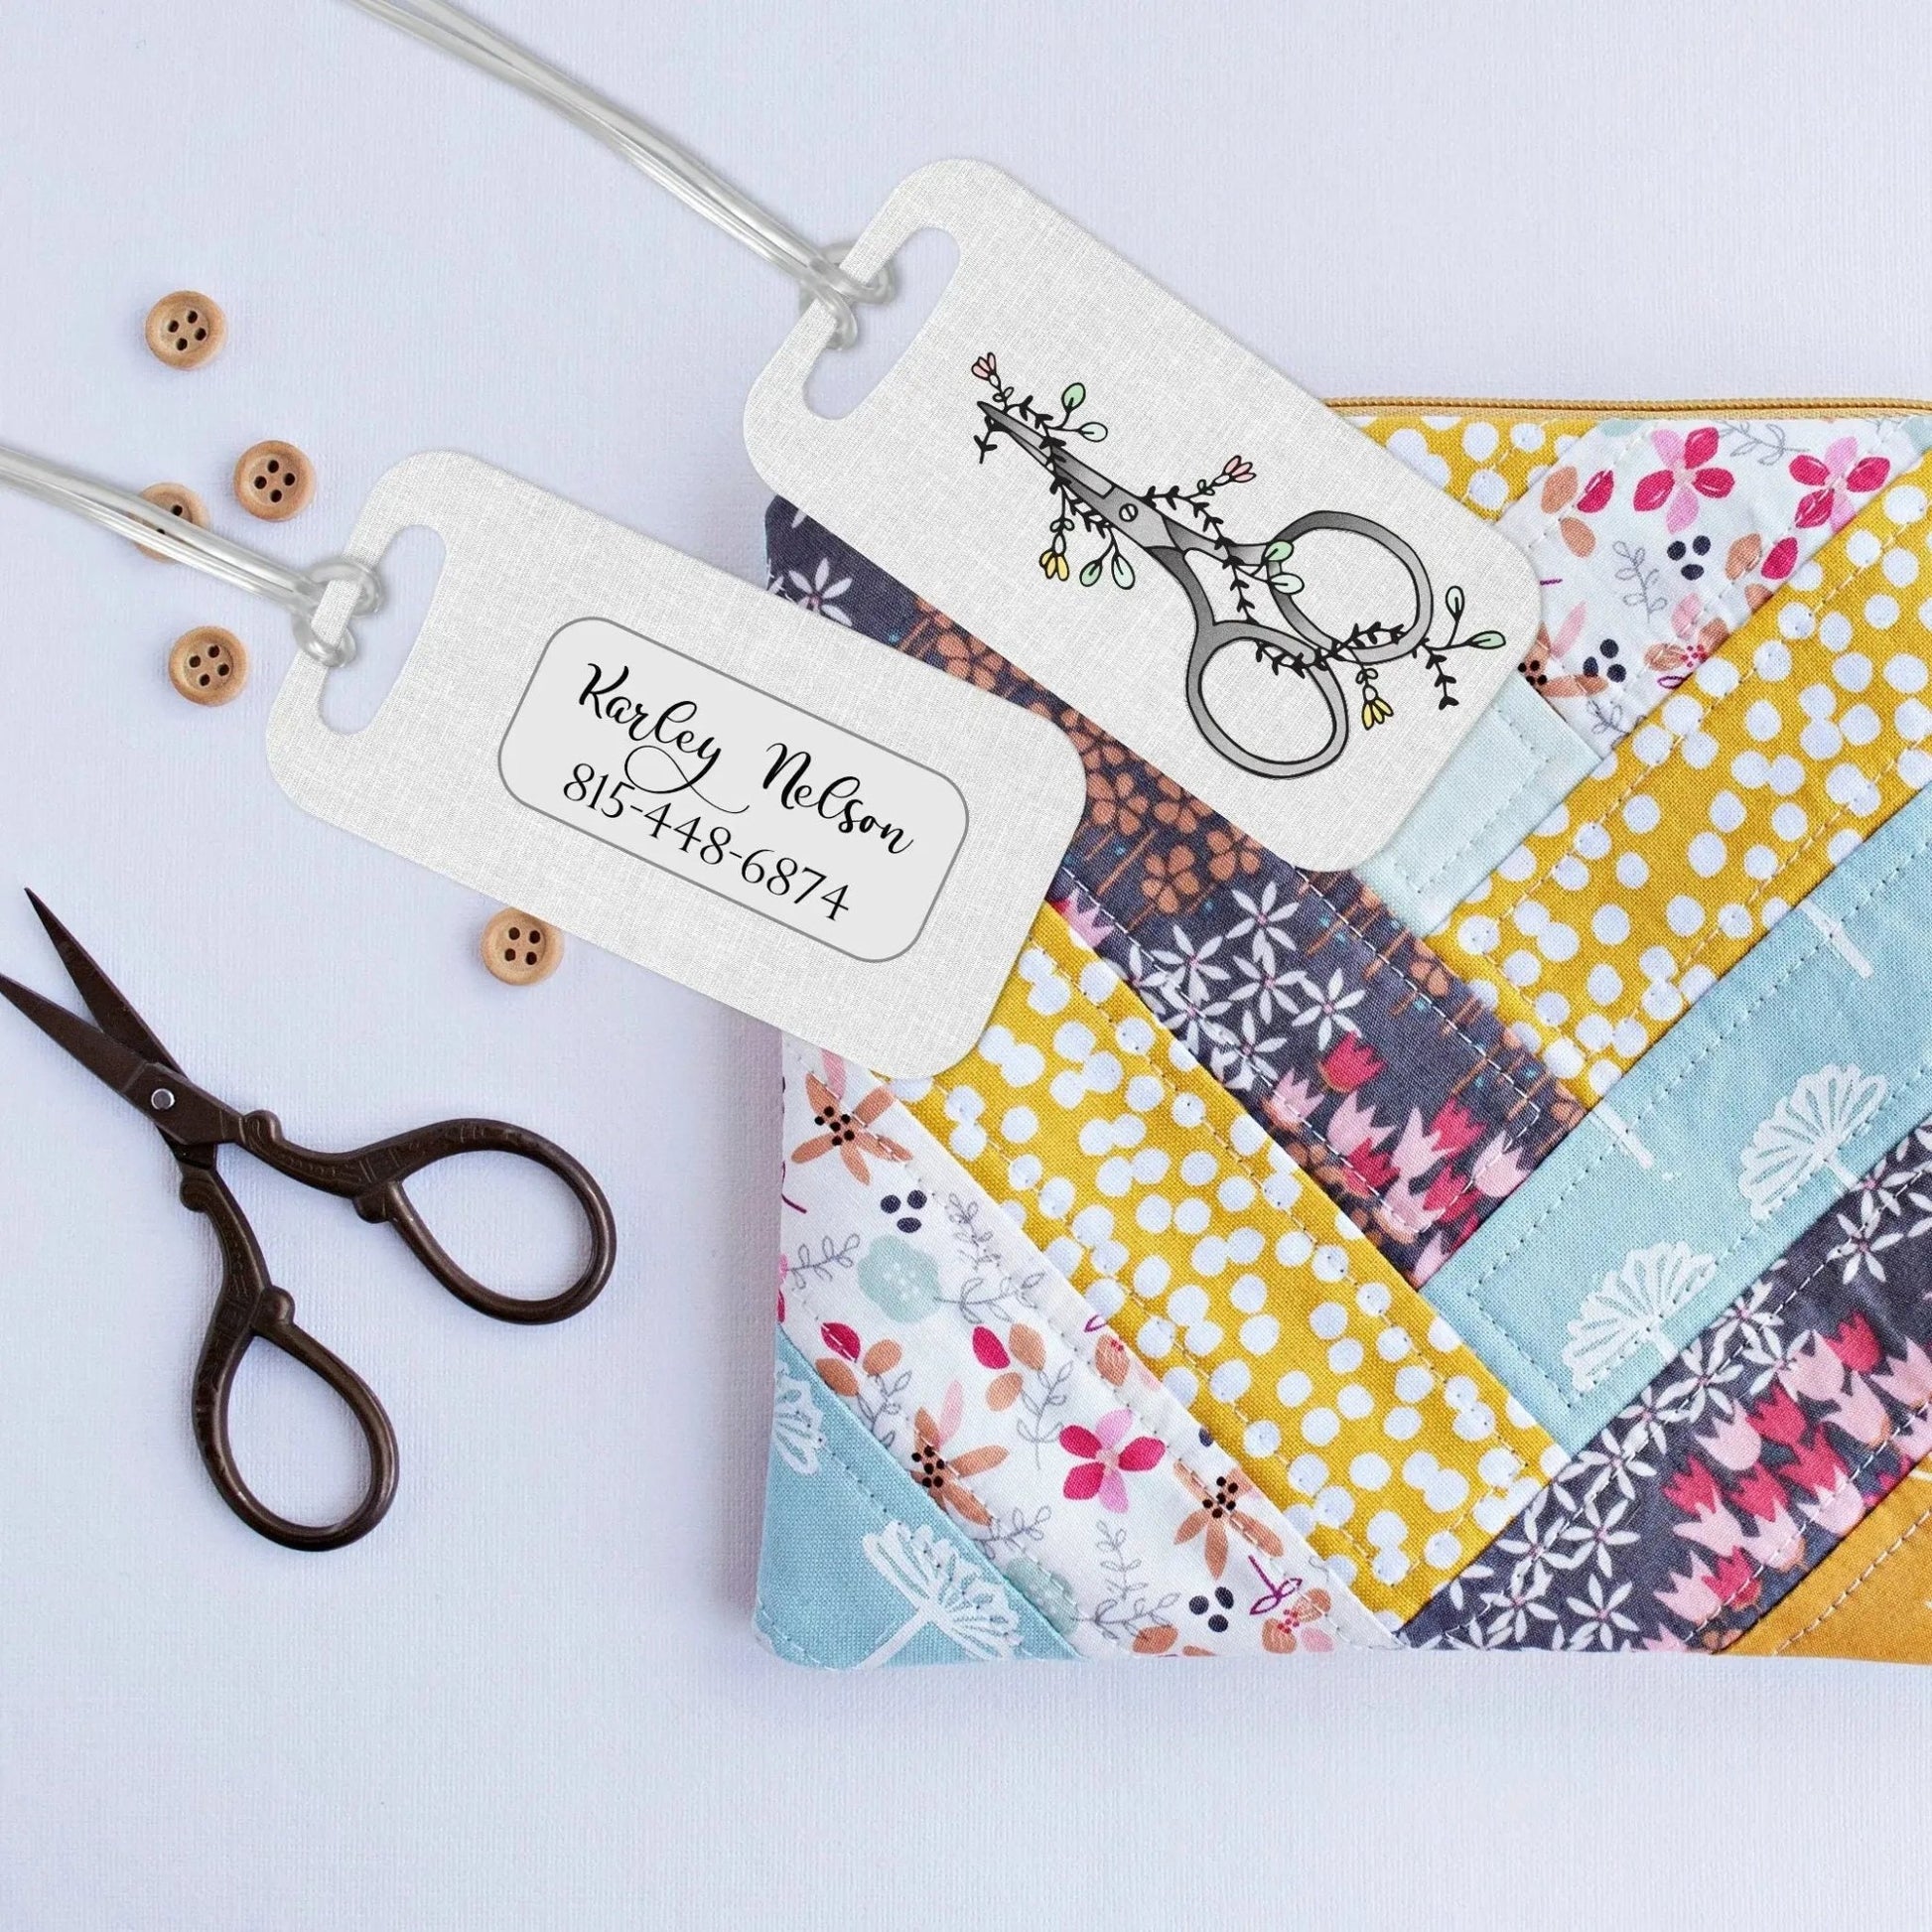 Floral Scissors Bag Tag. Personalized luggage tag for quilters and sewists by Jammin Threads